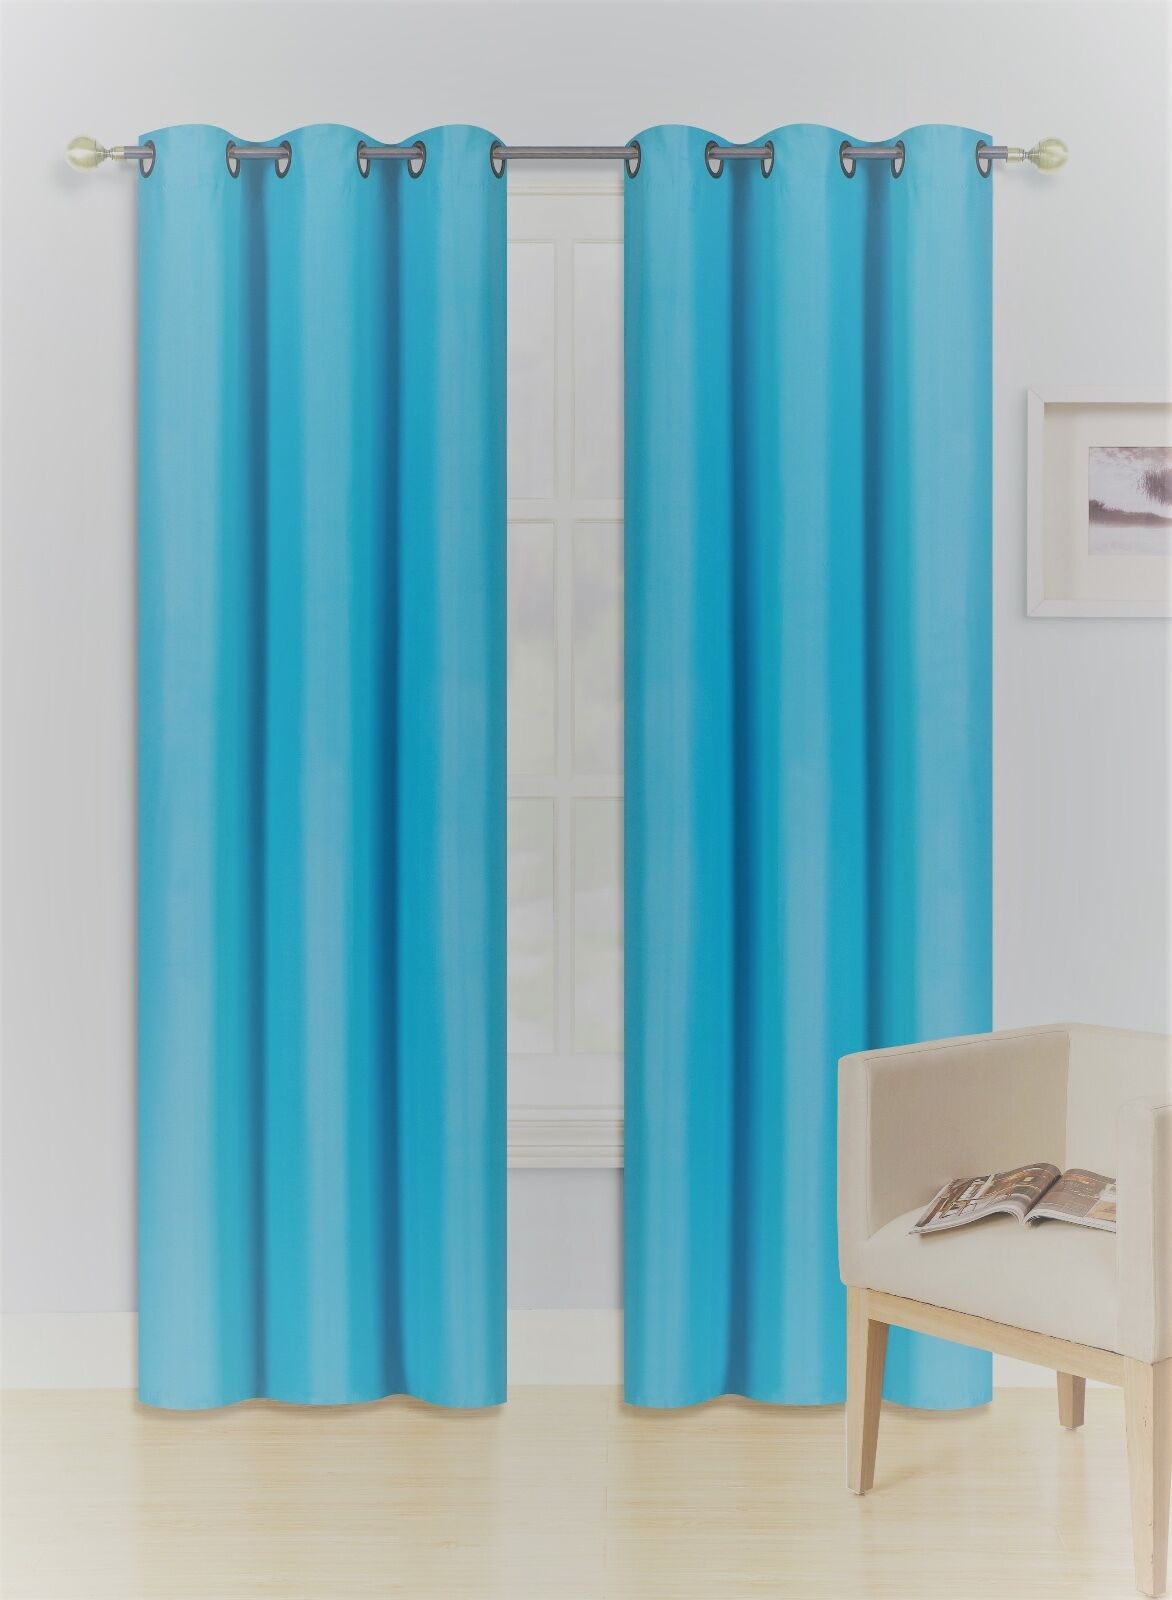 2PC Insulated Foam Lined Heavy Thick Blackout Grommet Window Curtain Panels KK92